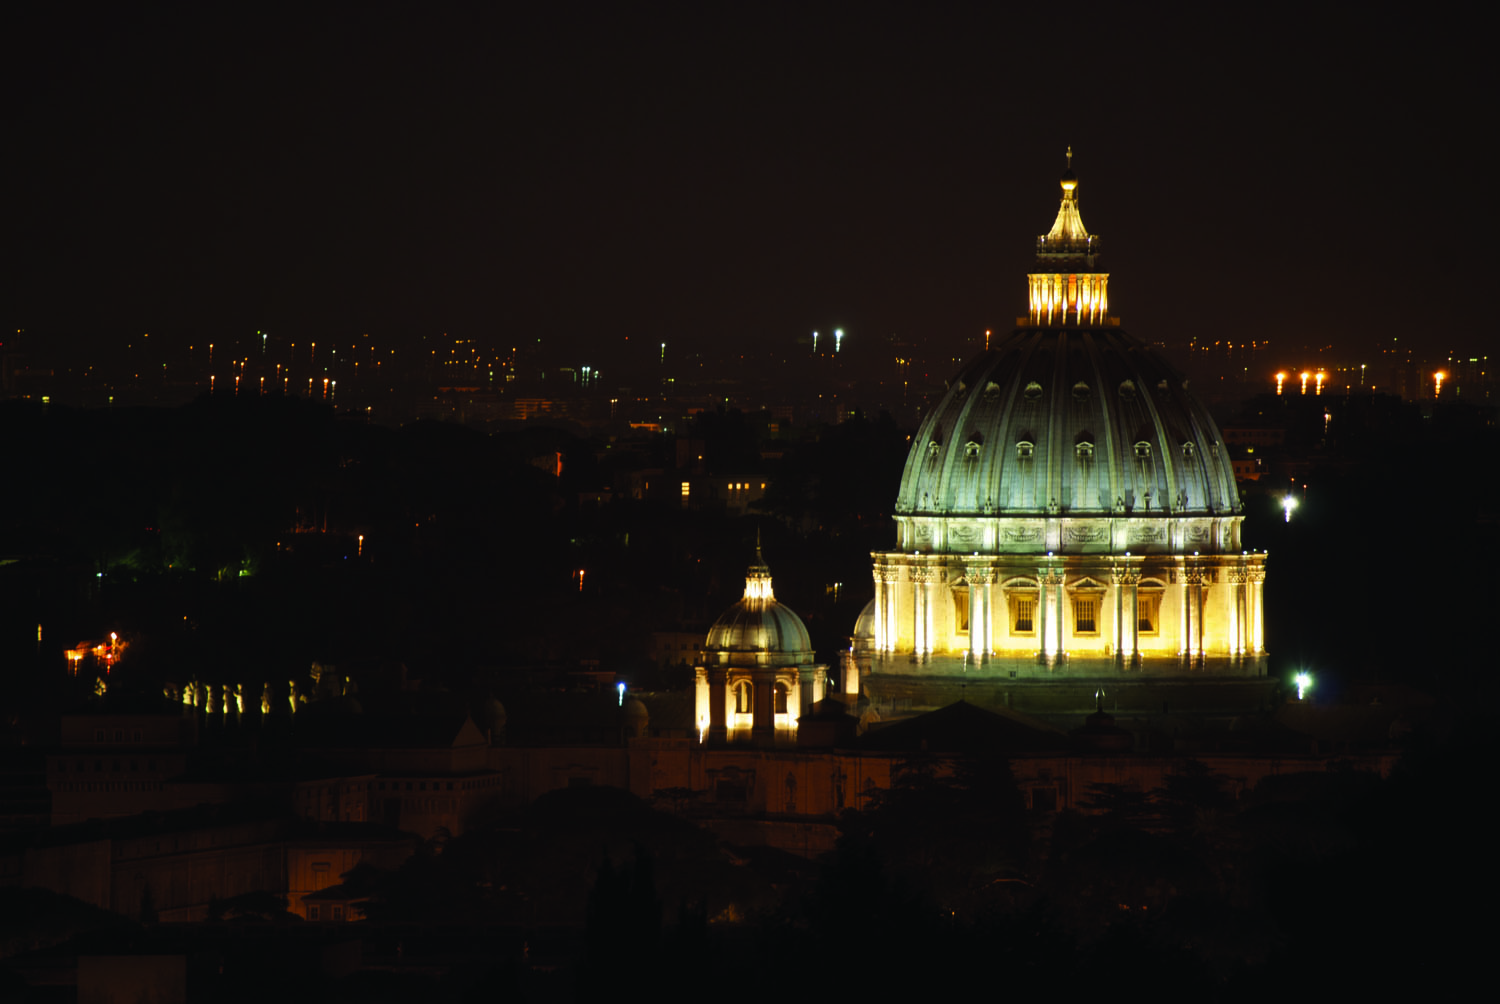 *St Peter's at night